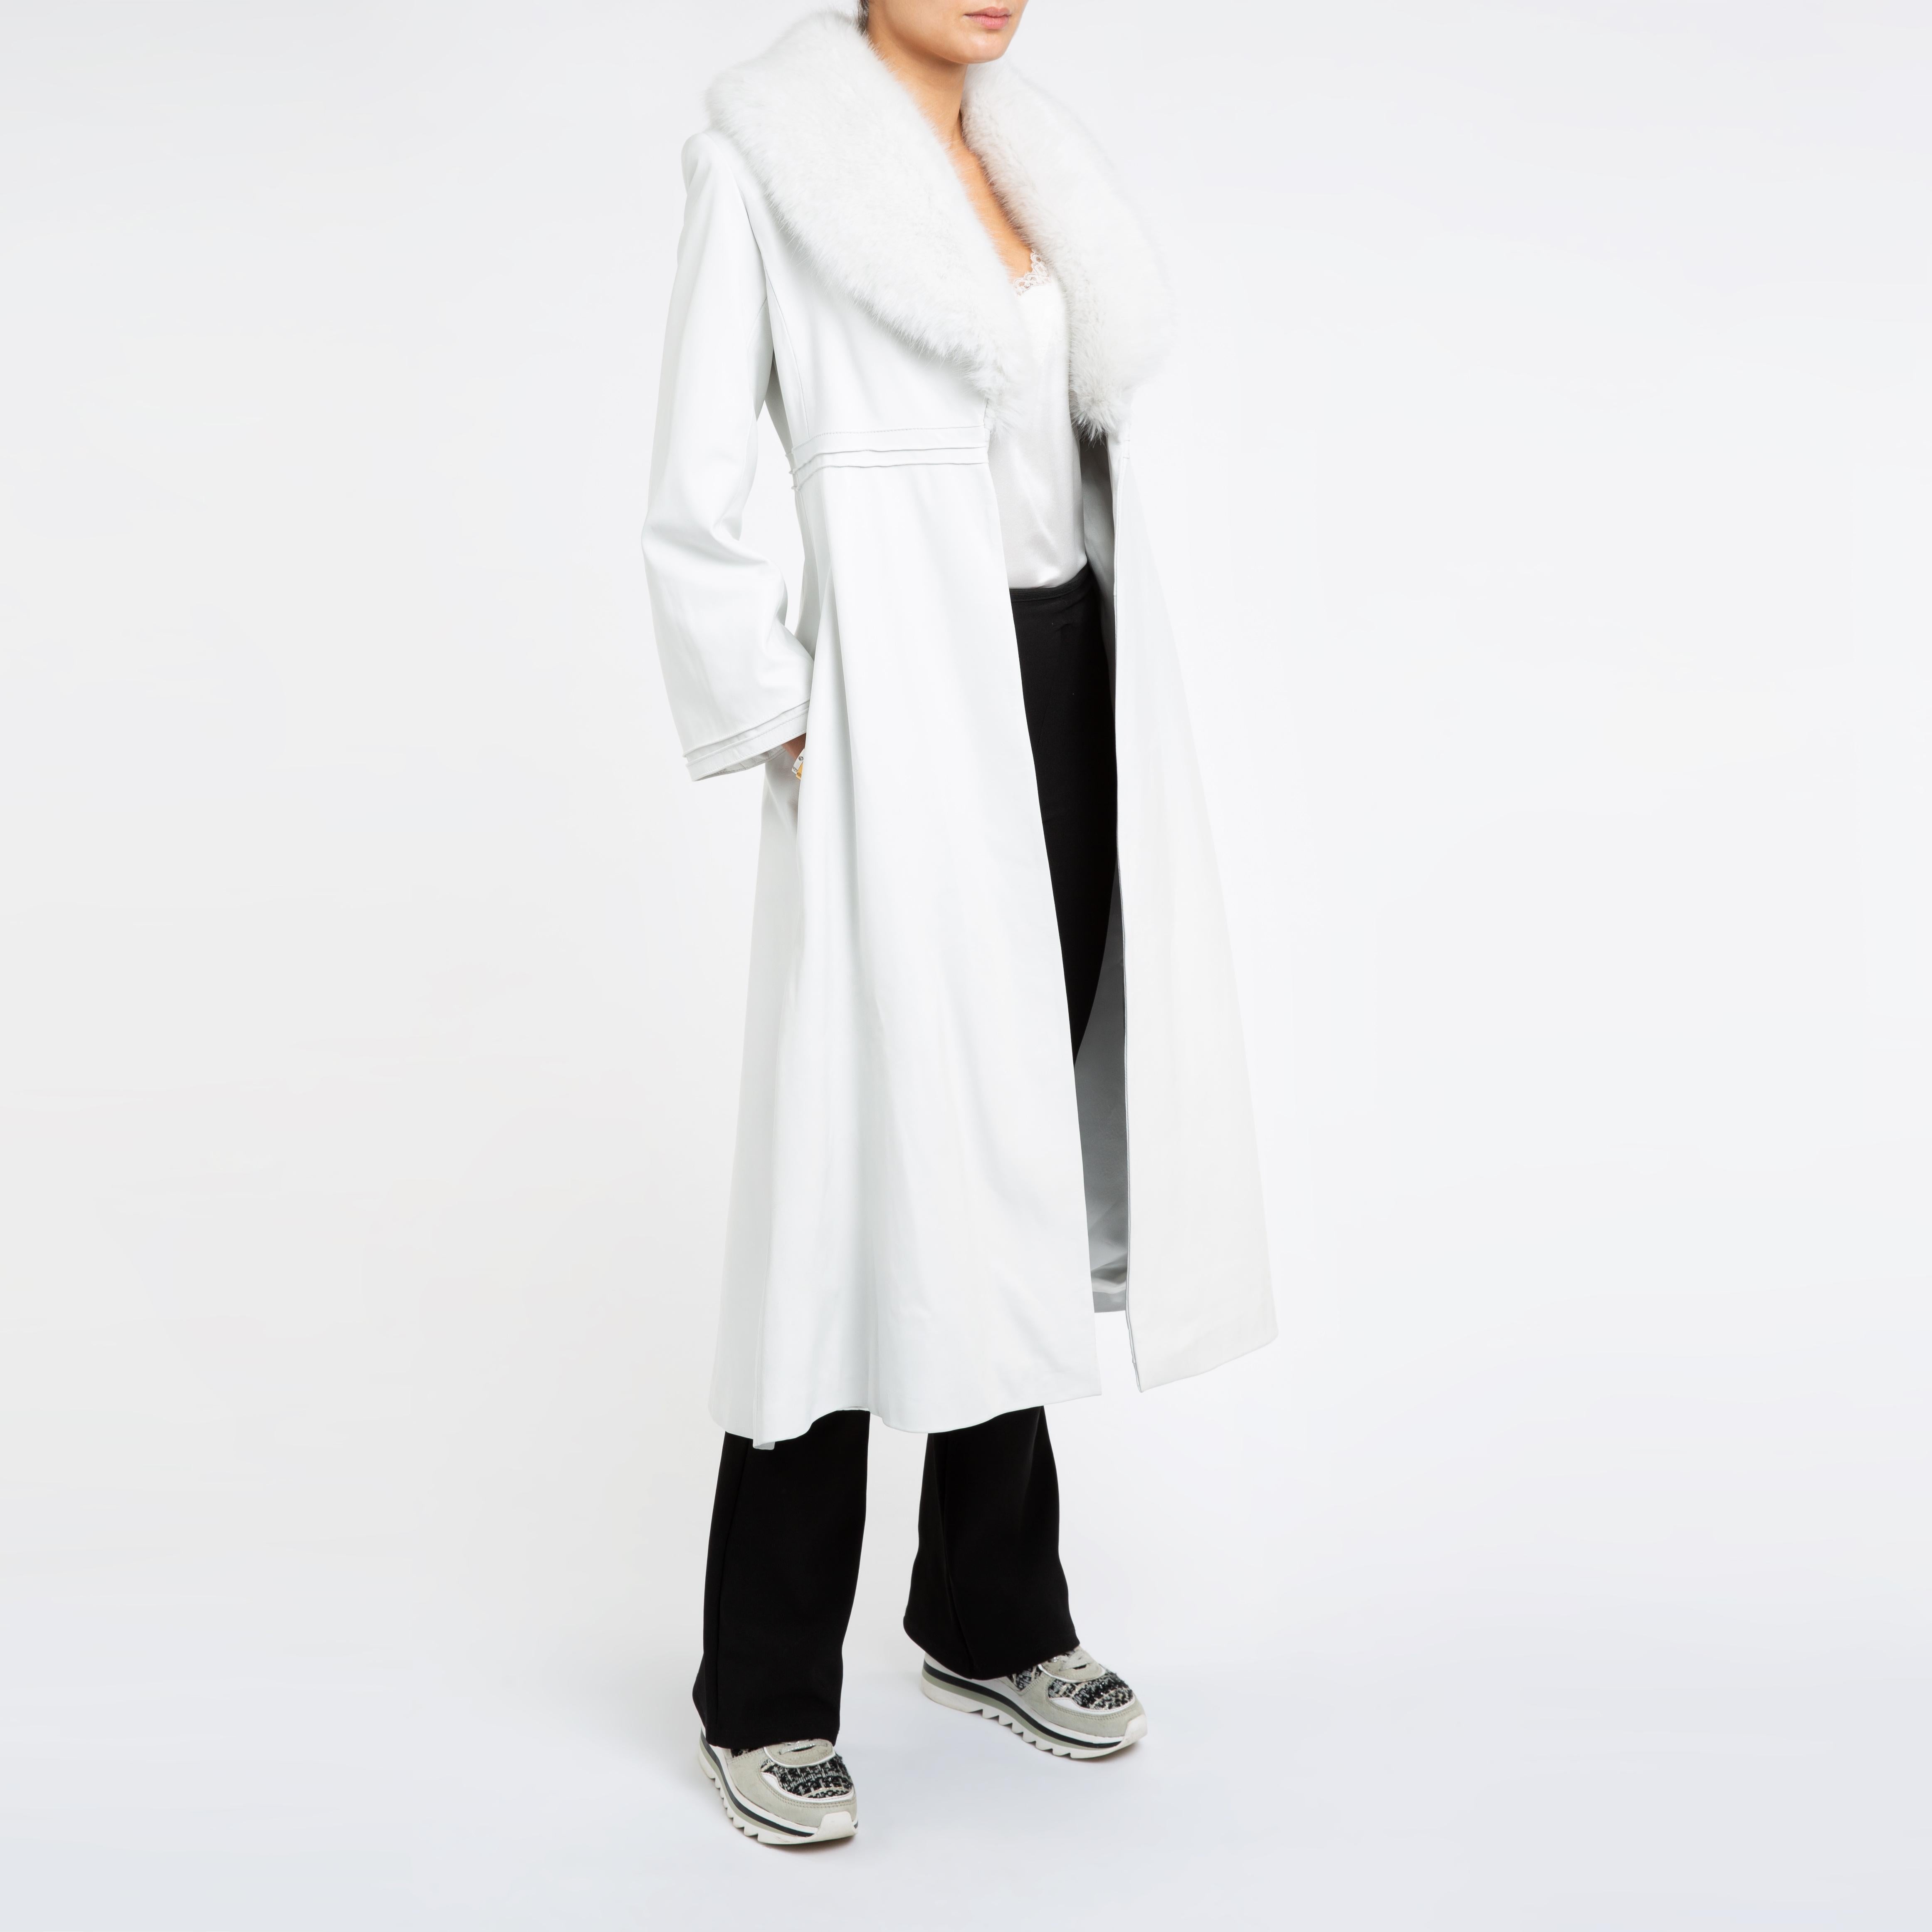 Verheyen London Edward Leather Coat in White with Faux Fur - Size uk 8 

The Edward Leather Coat created by Verheyen London is a romantic design inspired by the 1970s and Edwardian Era of Fashion.  A timeless design to be be worn for a lifetime and